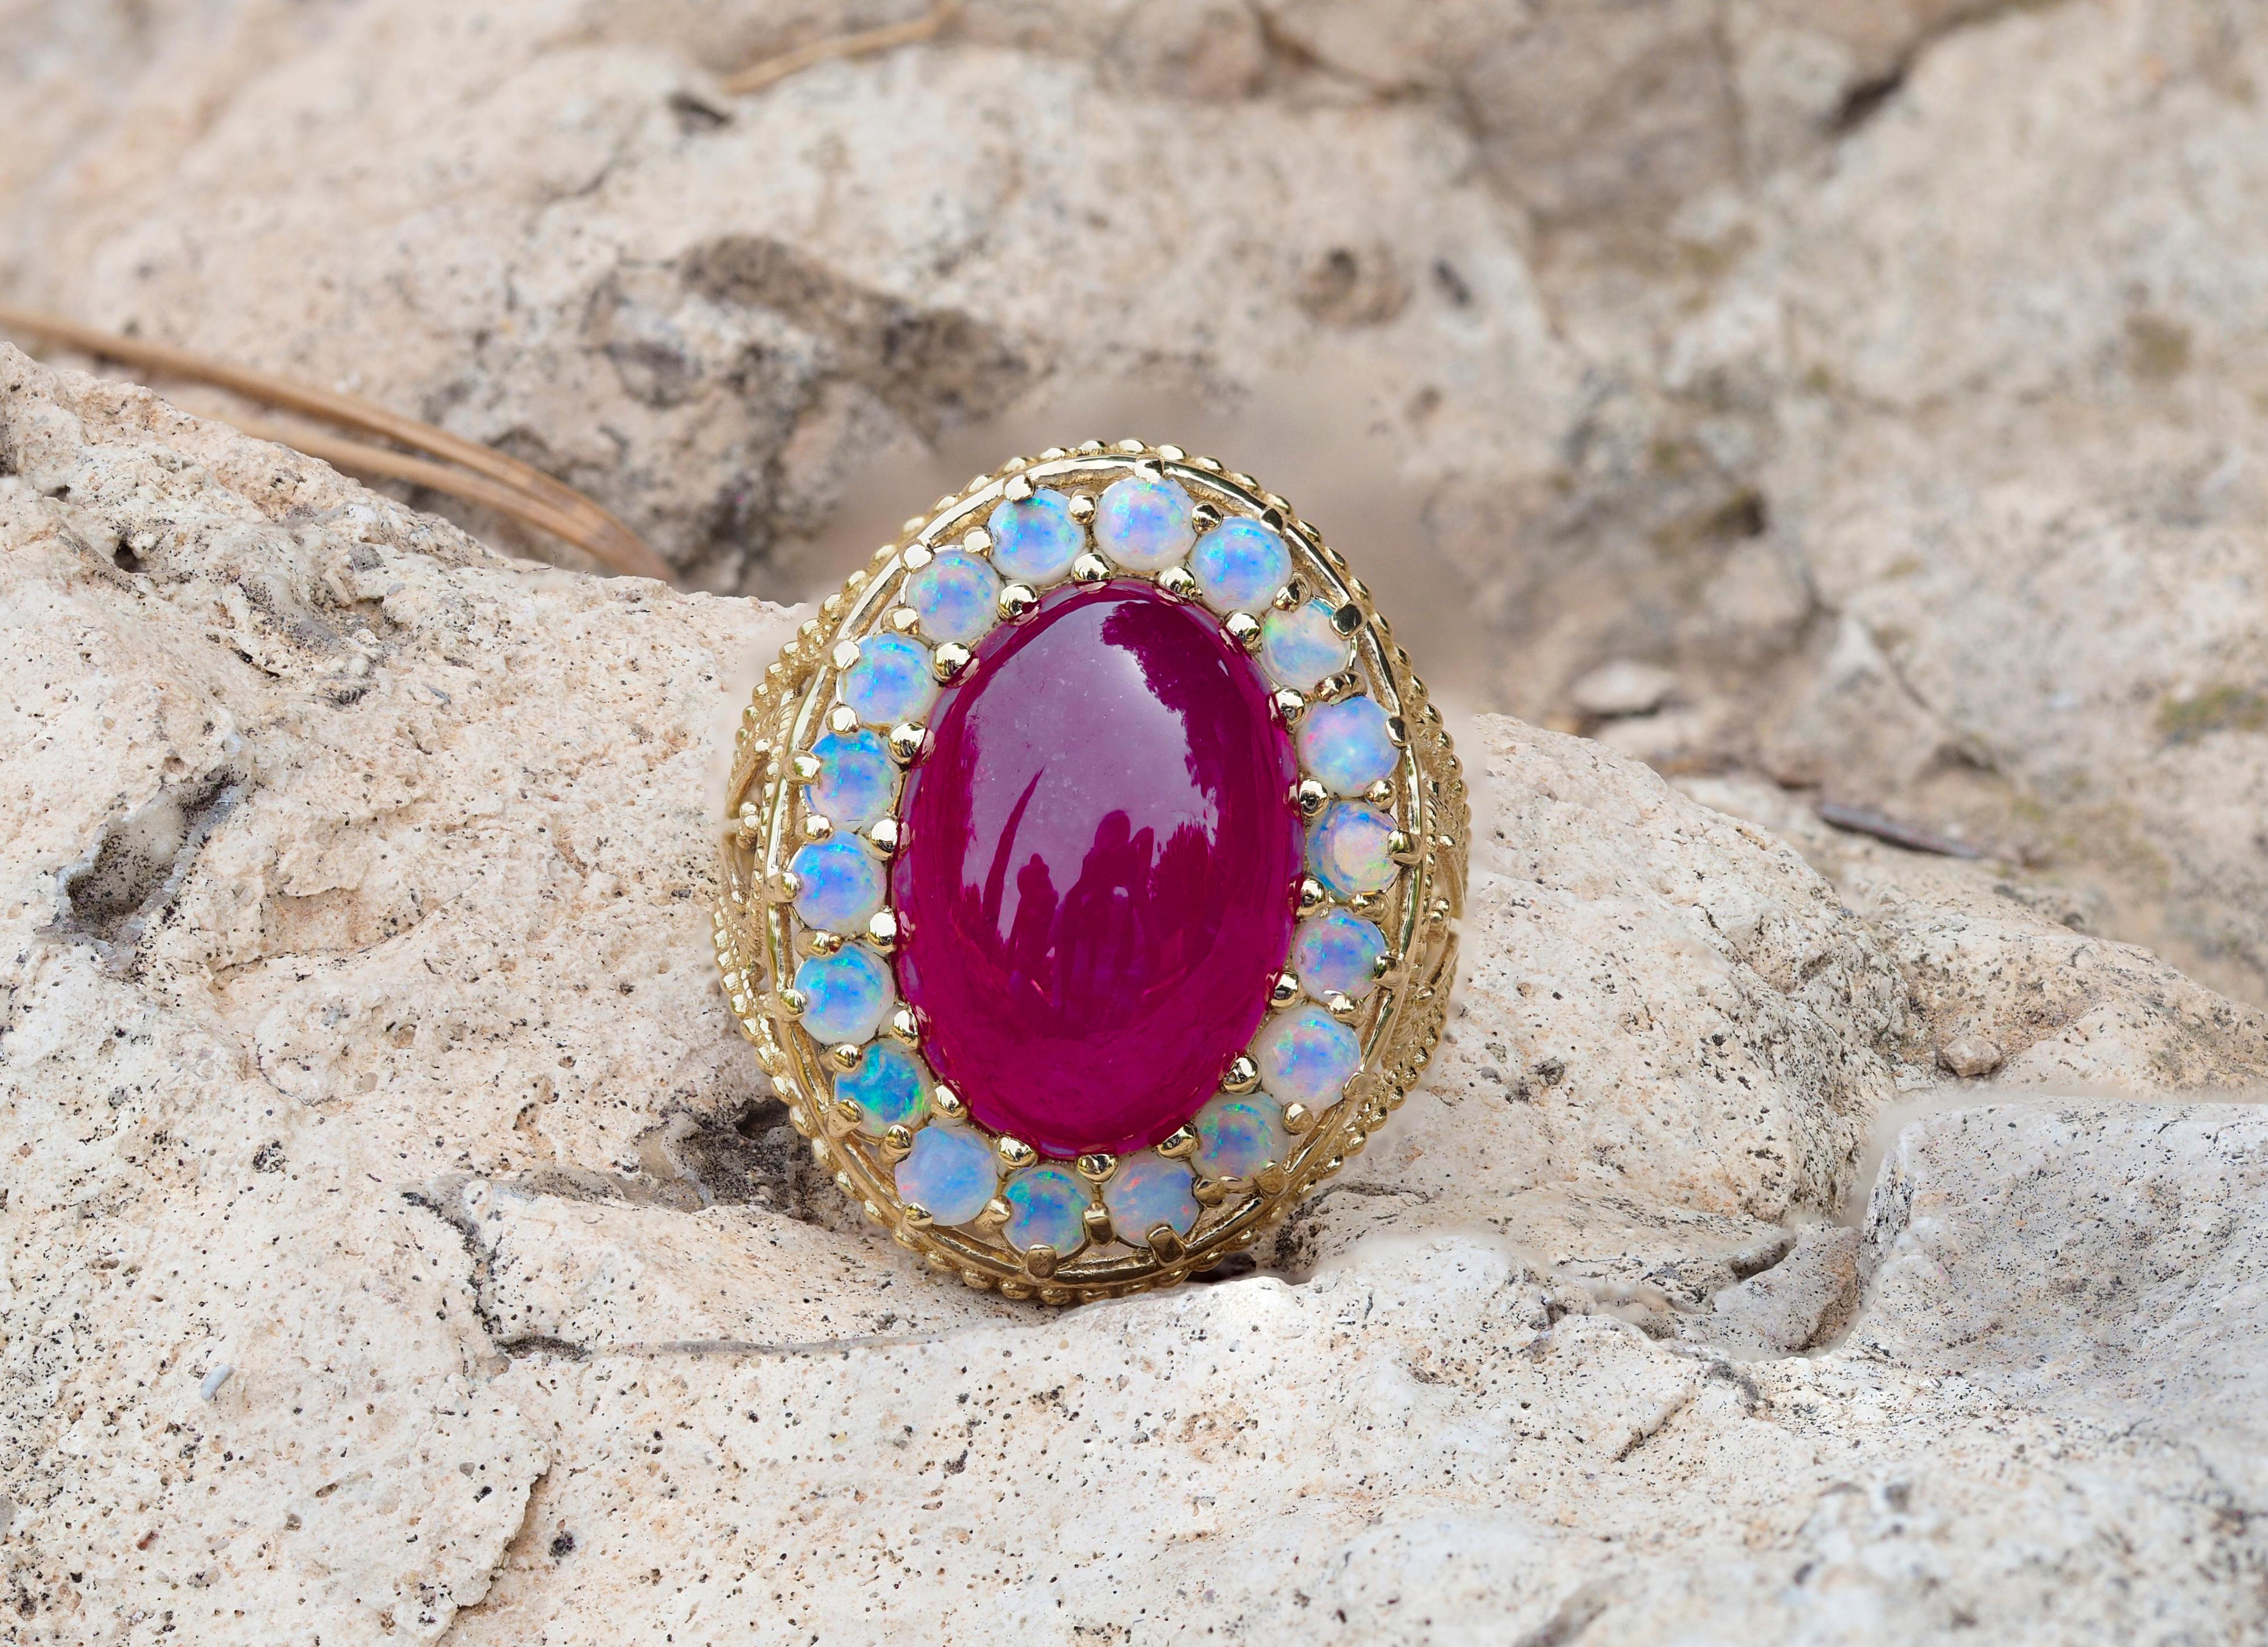 For Sale:  14k Massive Gold Ring with Cabochon Ruby and Opals, Vintage Inspired Ring 2